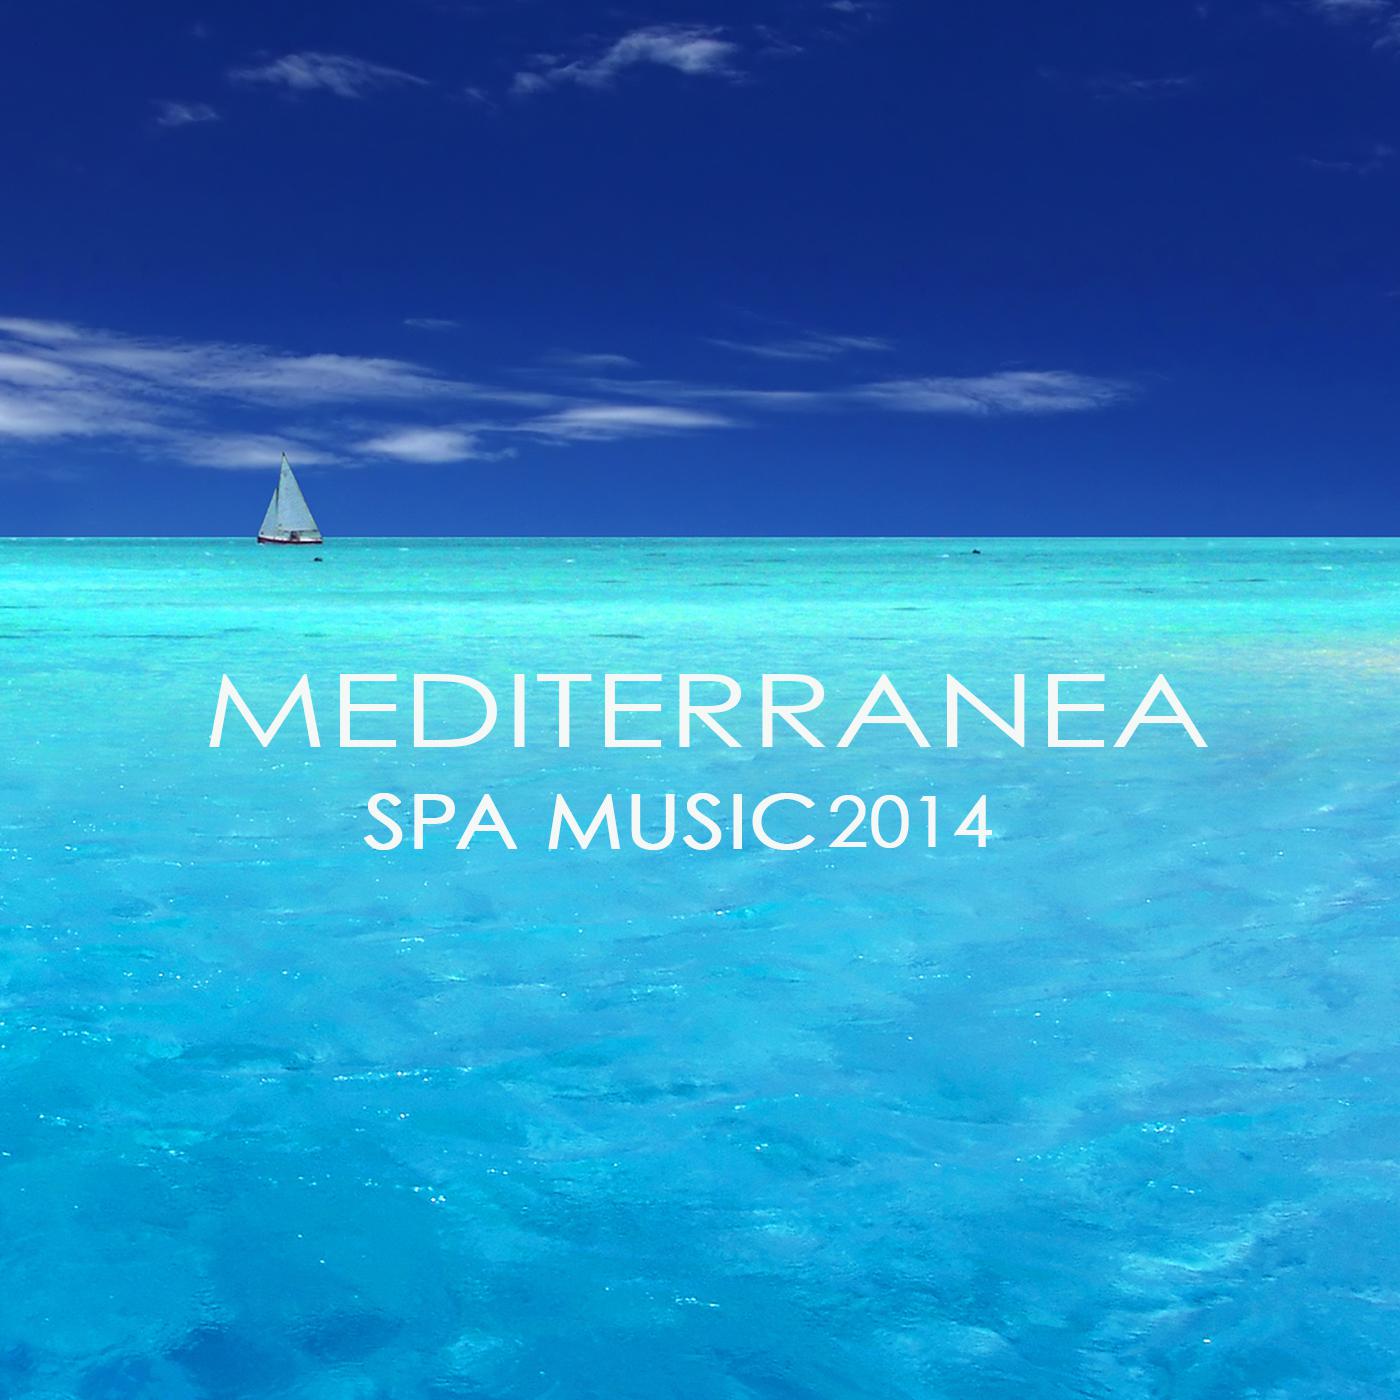 Mediterranea Spa Music 2014 - Peaceful Relaxation Meditation Healing Music for Massage, Chakra Balancing, Yoga, Reiki, Deep Meditation & Tai Chi, Relaxing Sounds from the Islands in the Sun